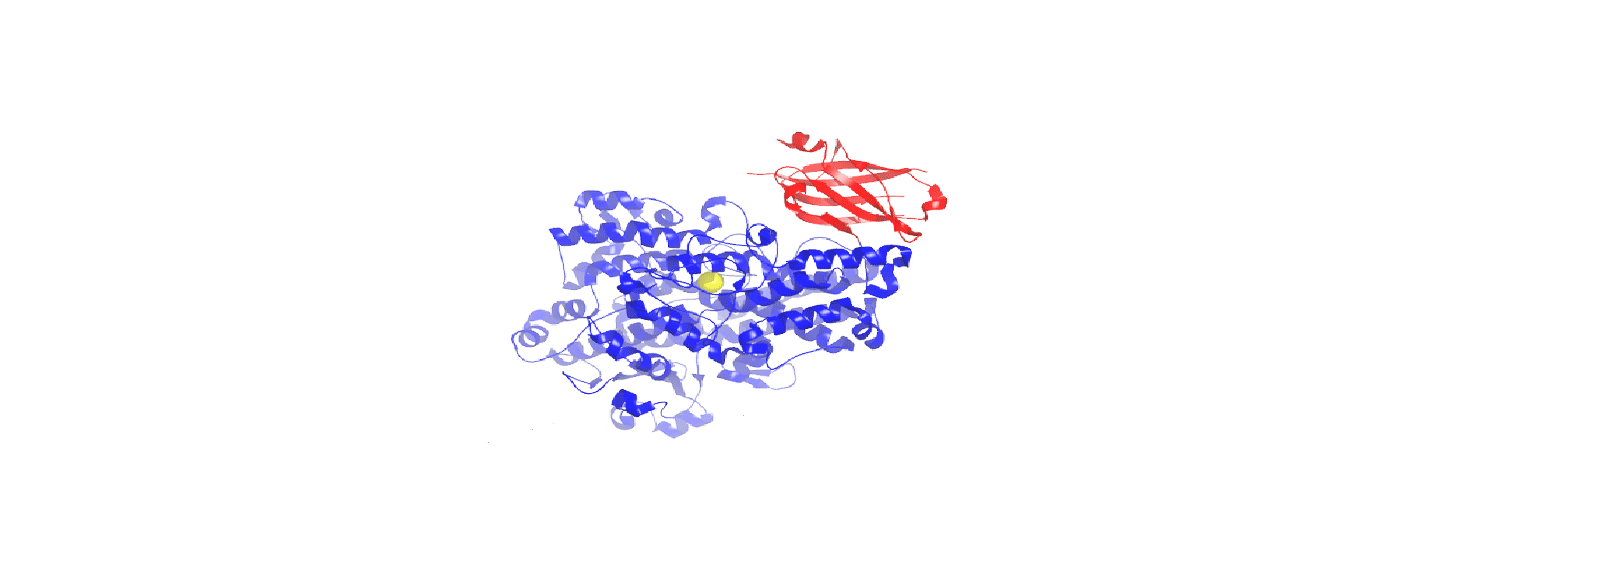 Ted Holman's Lab logo - the protein lipoxygenase is in blue and red with the iron at the active sites as a yellow circle in the middle.